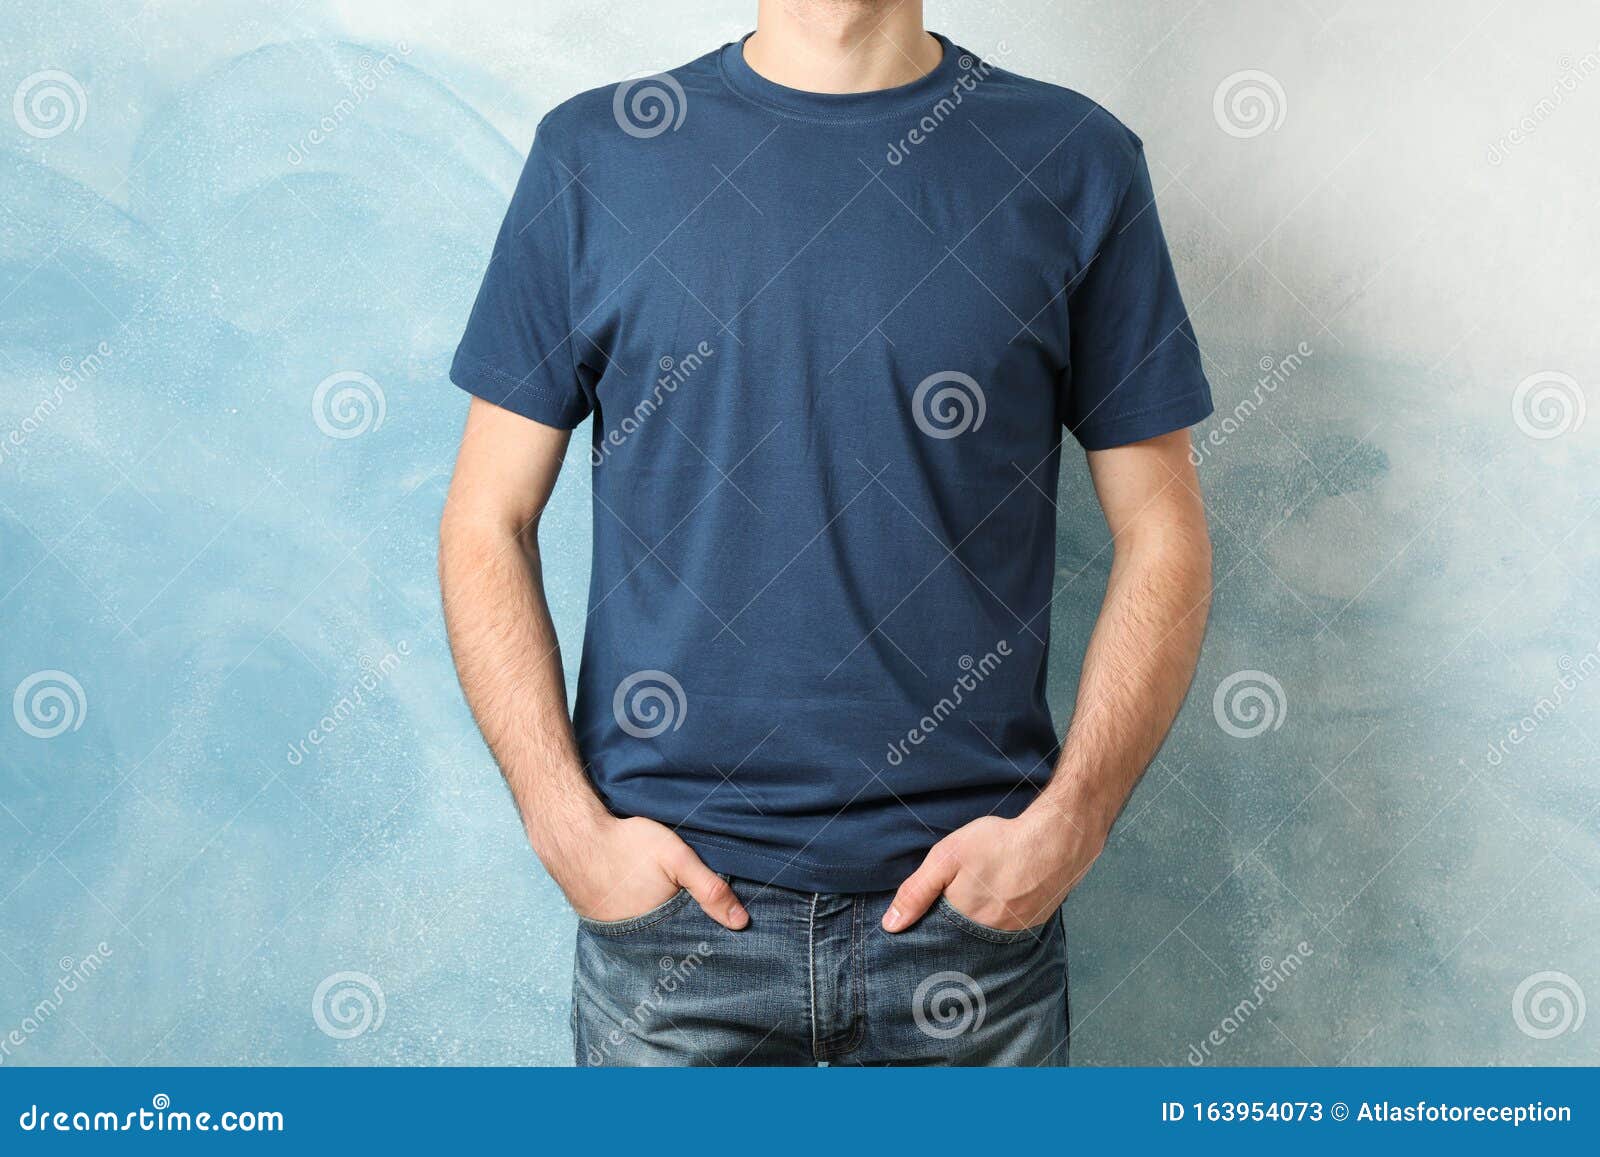 Men in Blank Blue T-shirt Against Color Background Stock Image - Image ...